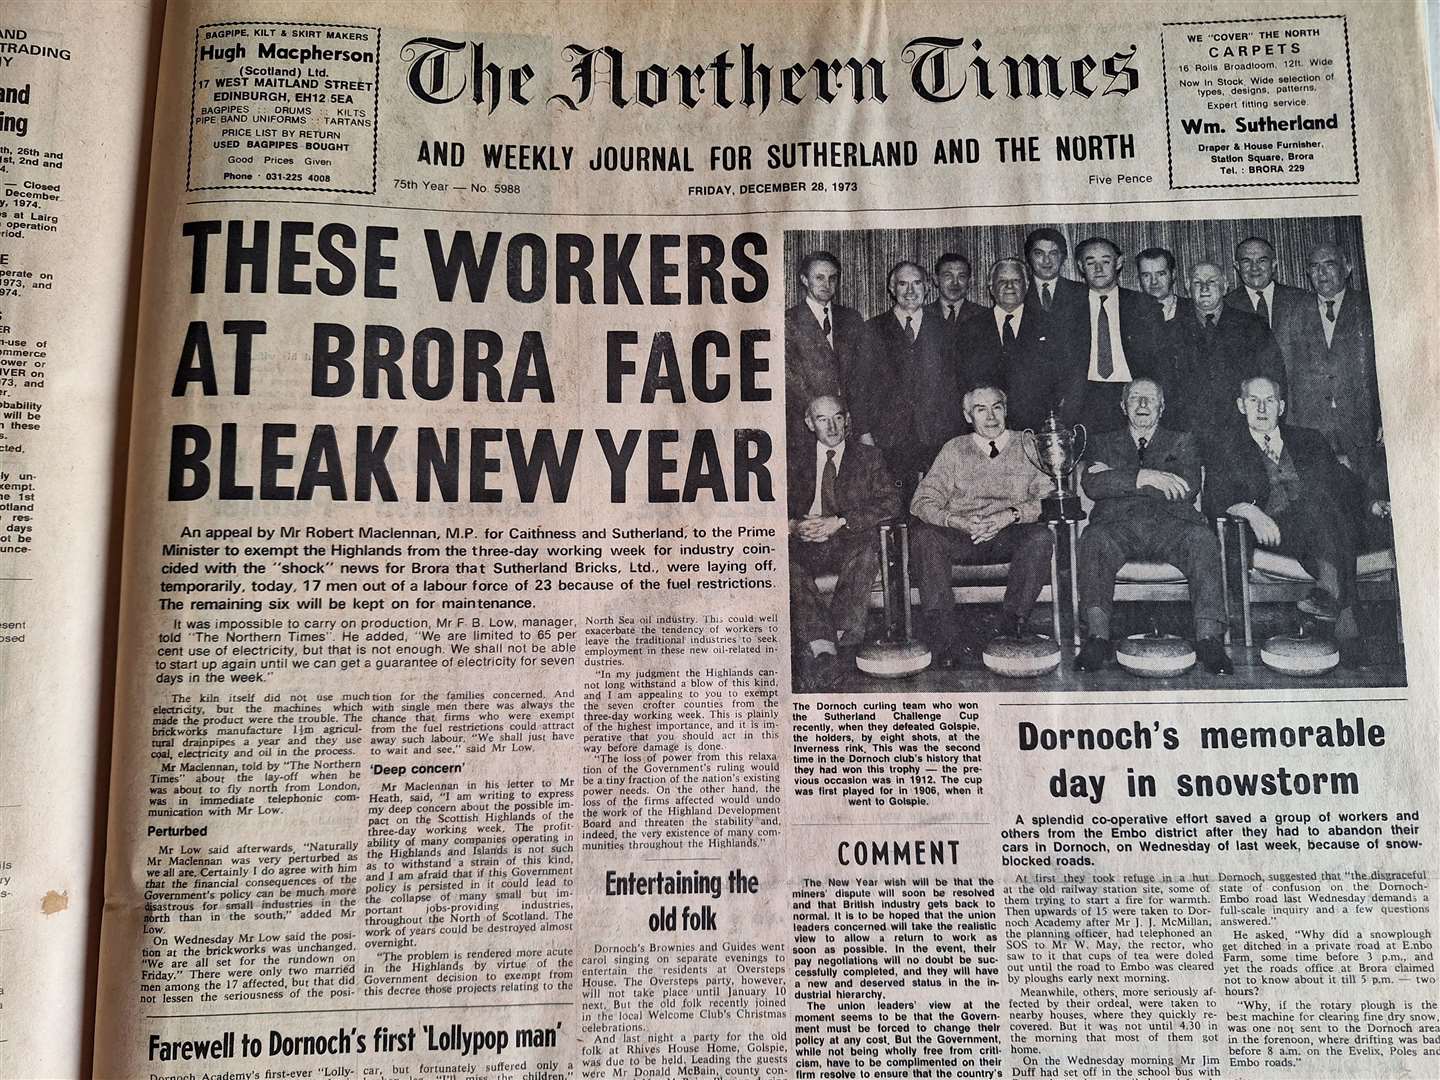 The edition of December 28, 1973.